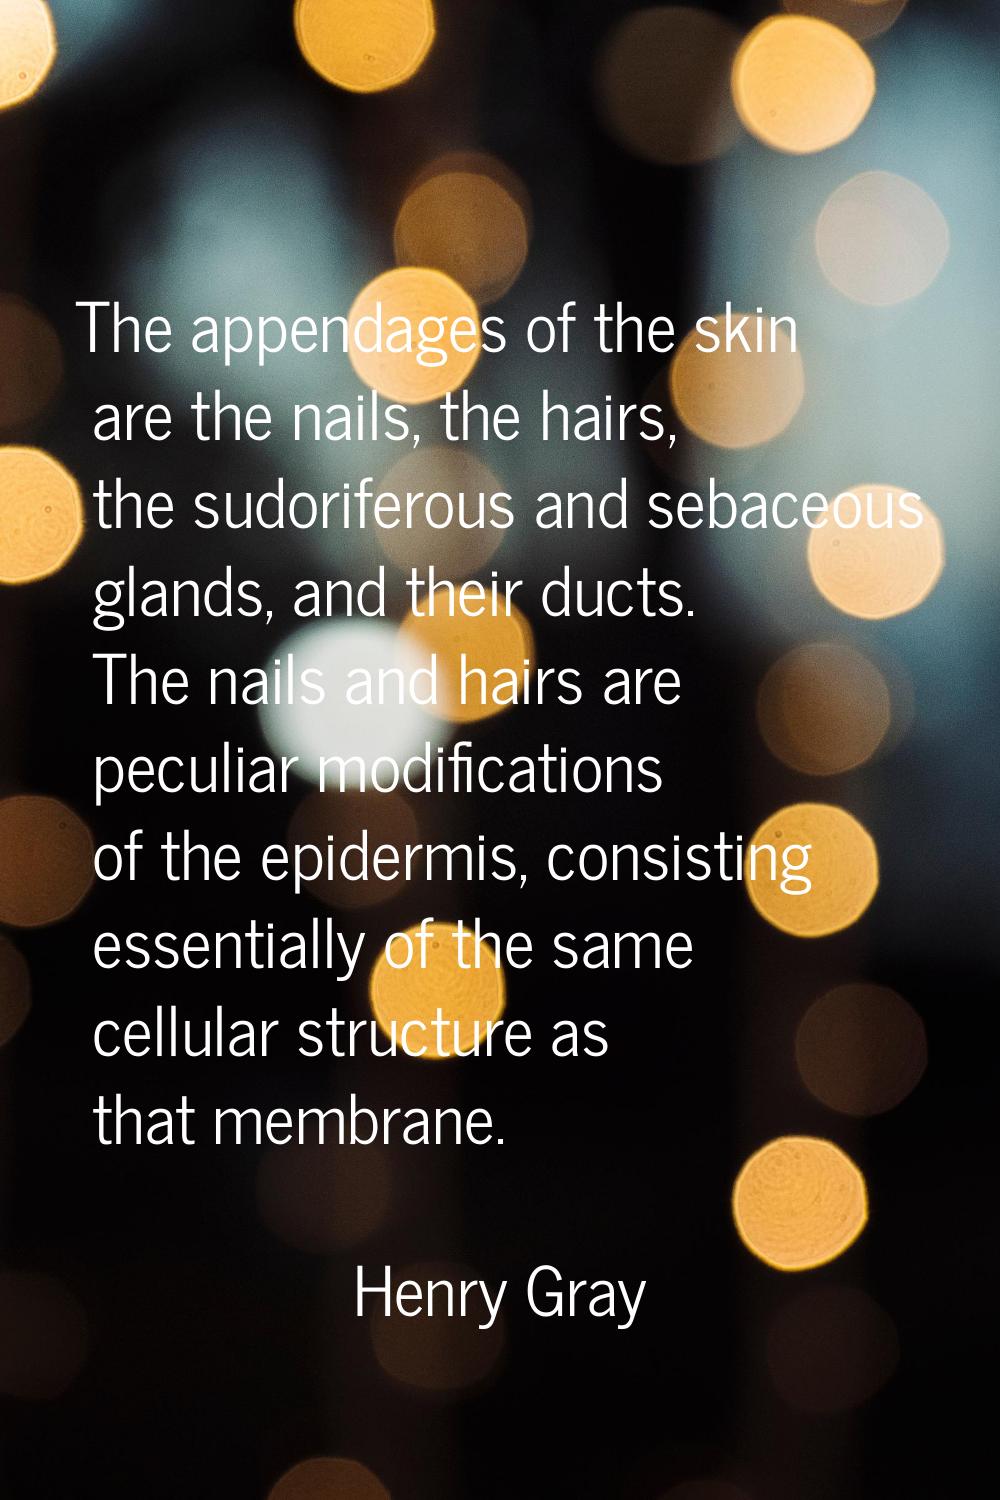 The appendages of the skin are the nails, the hairs, the sudoriferous and sebaceous glands, and the